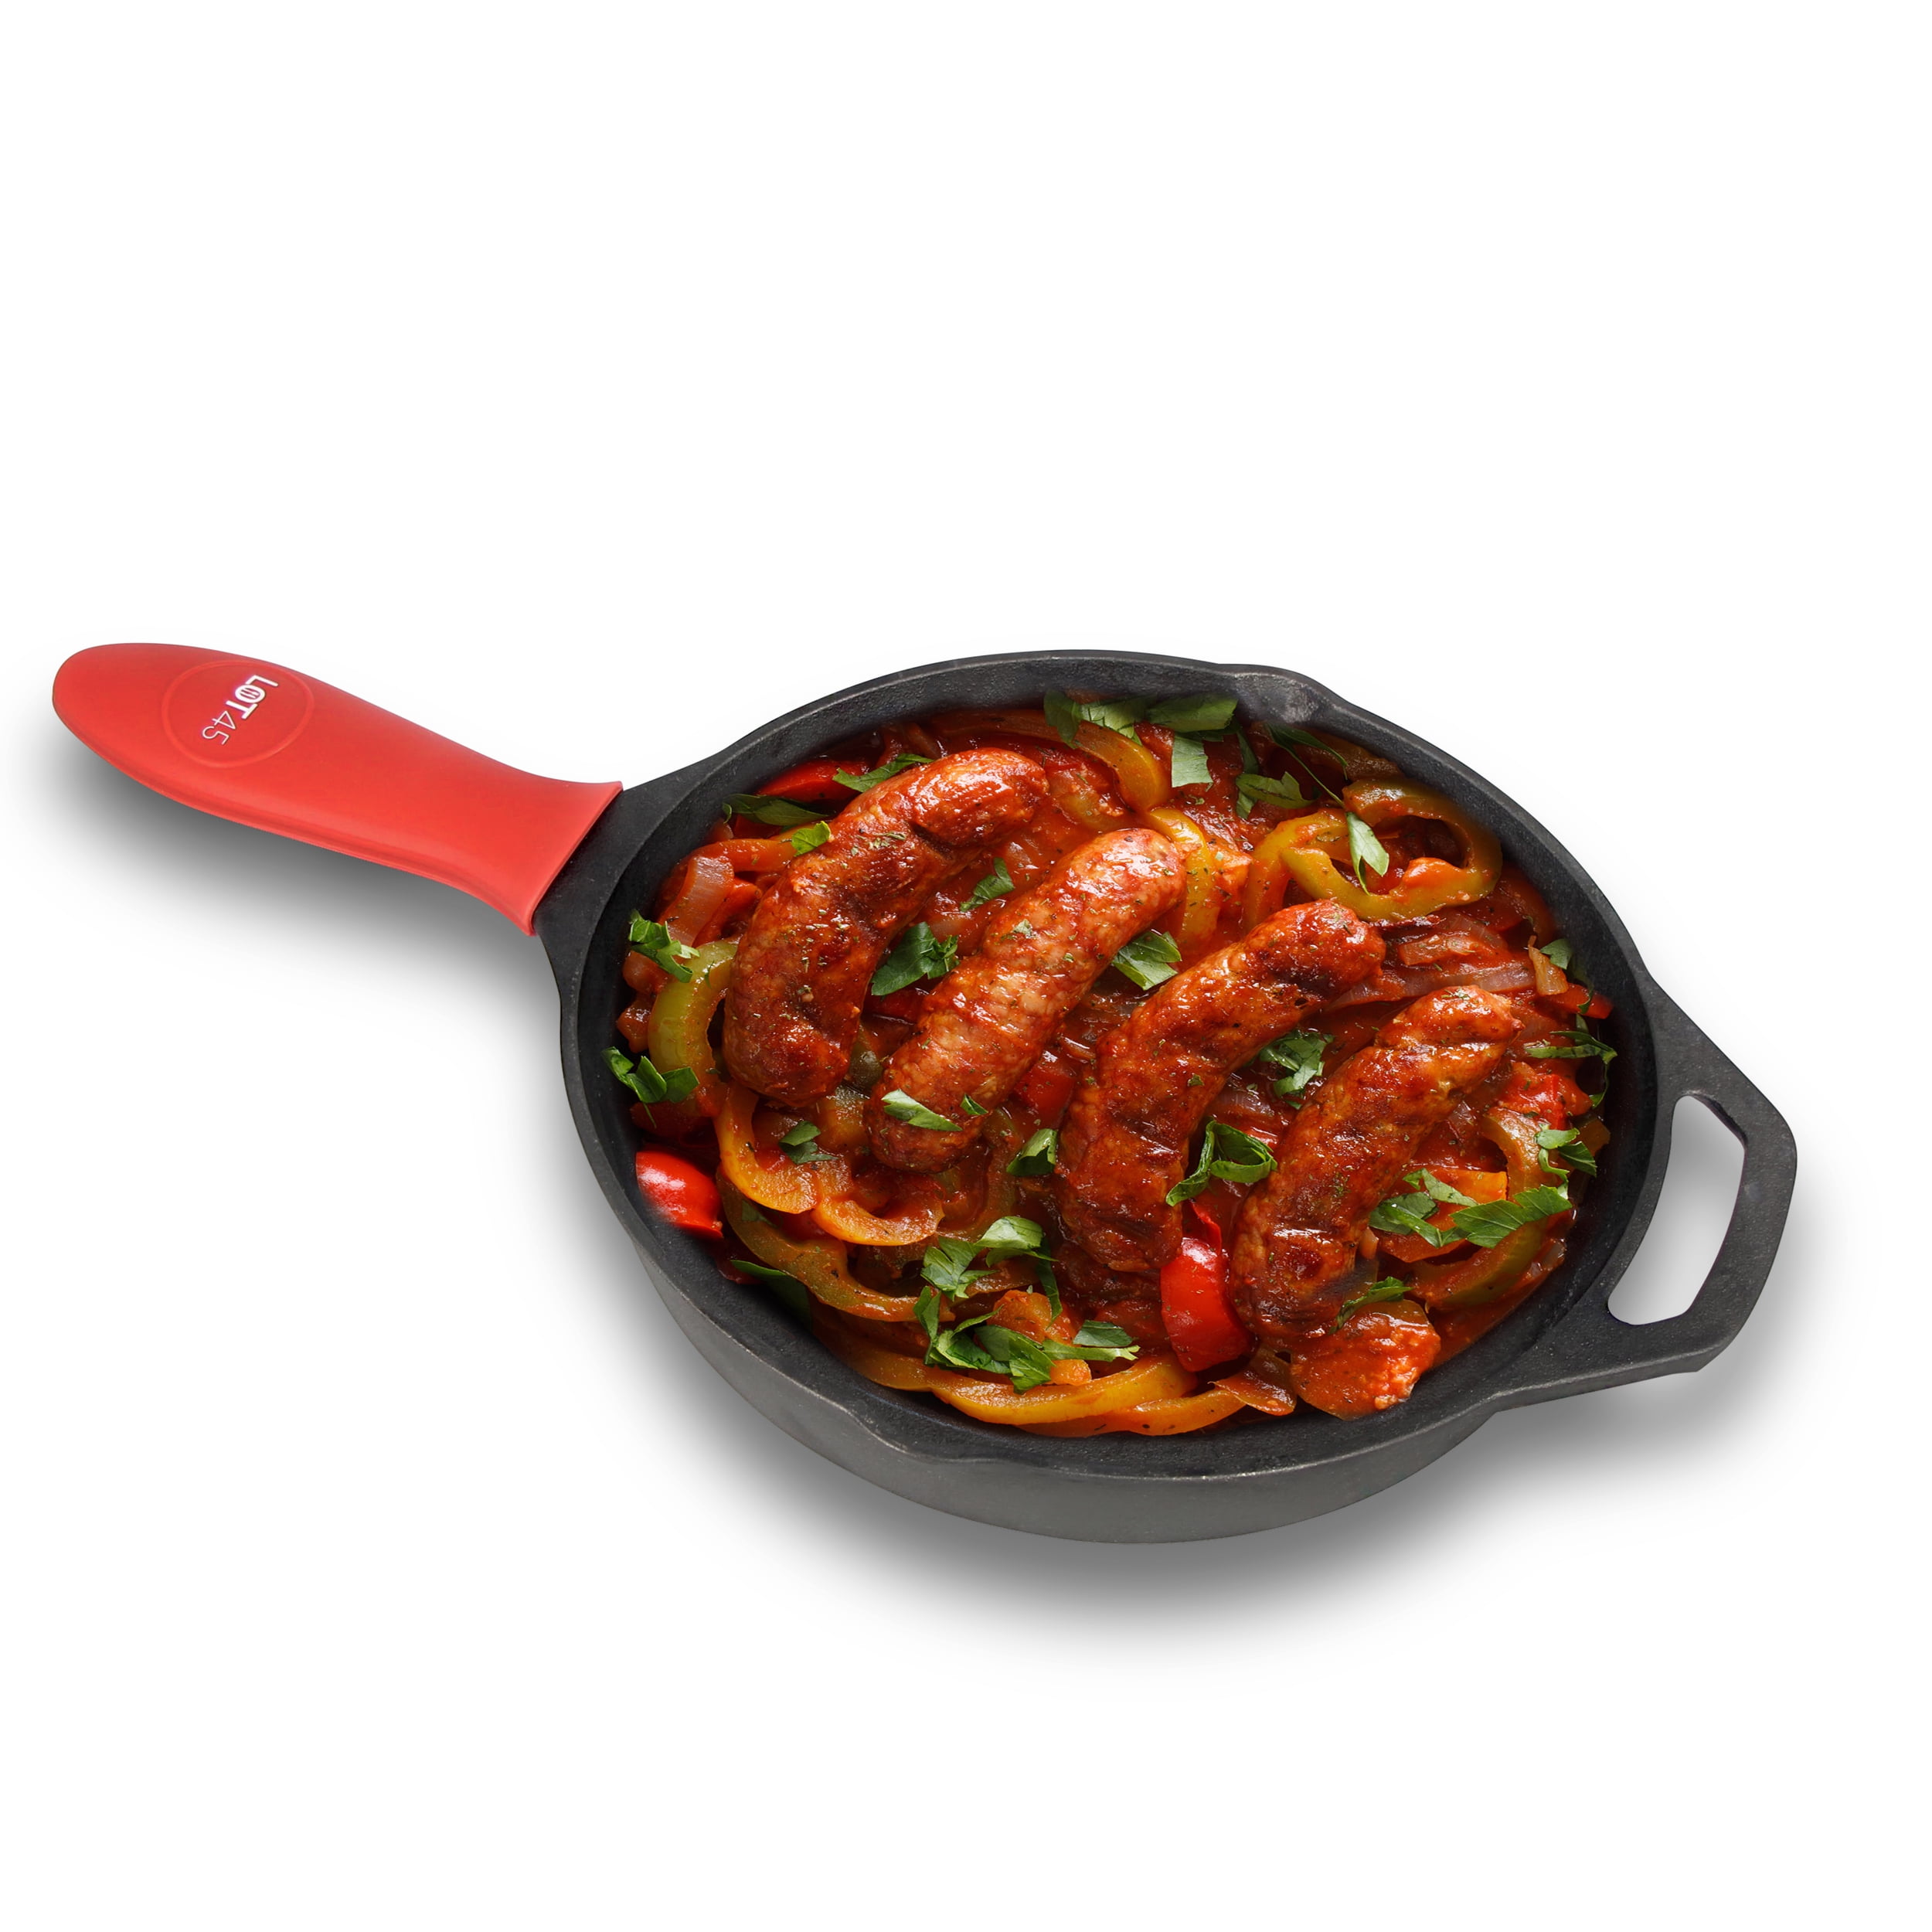 Backcountry Cast Iron Skillet (10 inch Medium Frying Pan + Cloth Handle Mitt, Pre-Seasoned for Non-Stick Like Surface, Cookware Oven/Broiler/Grill